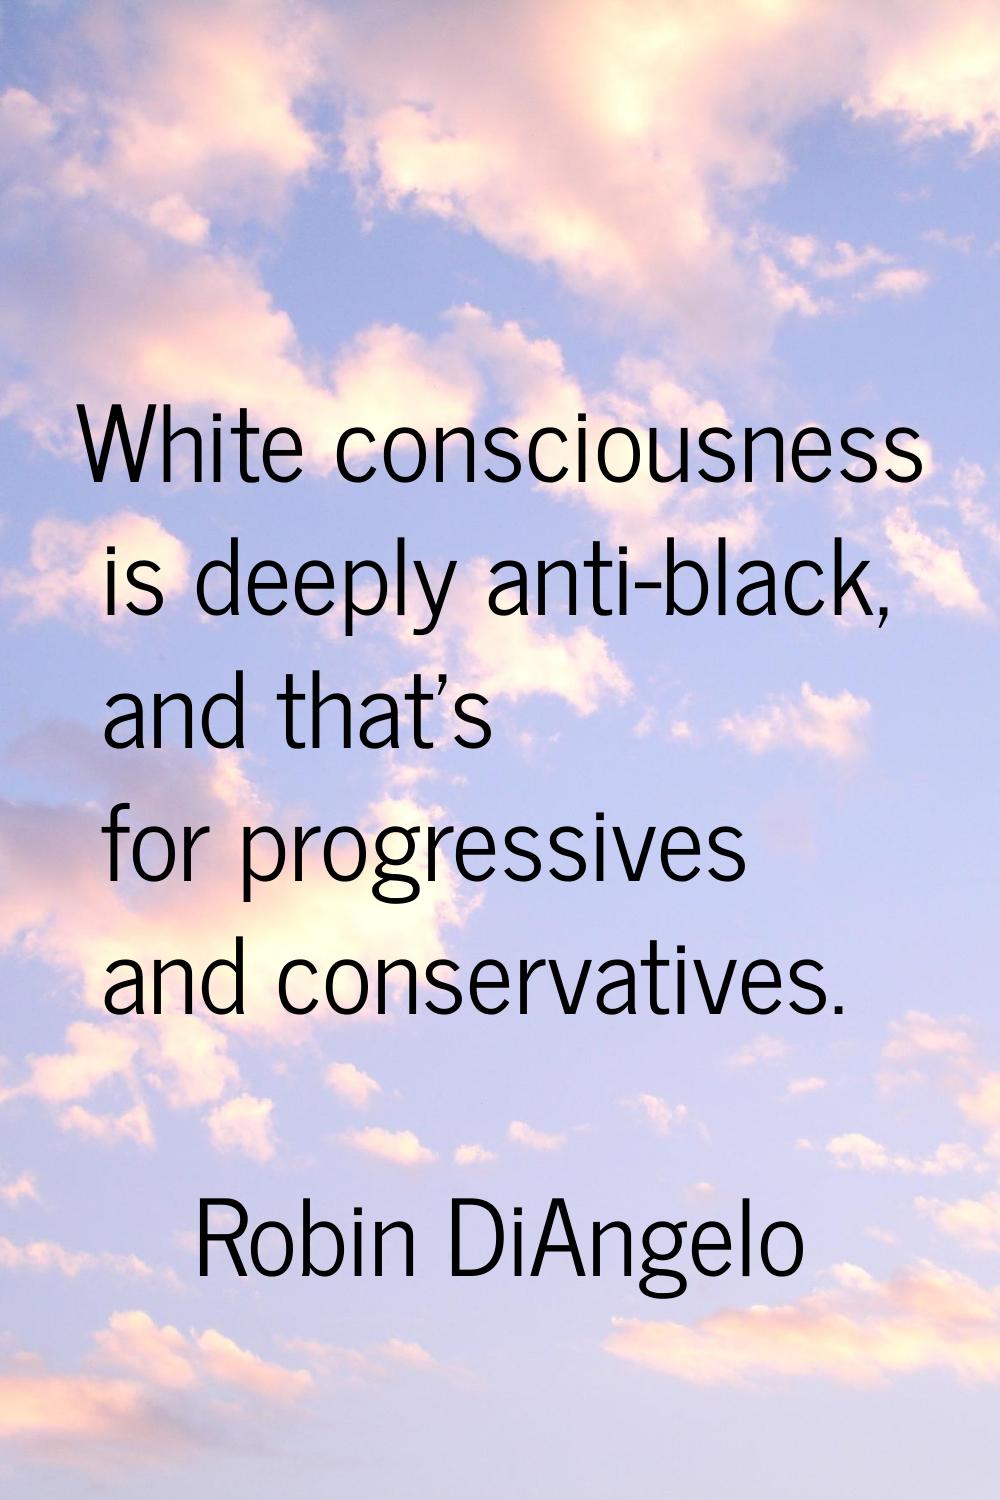 White consciousness is deeply anti-black, and that's for progressives and conservatives.